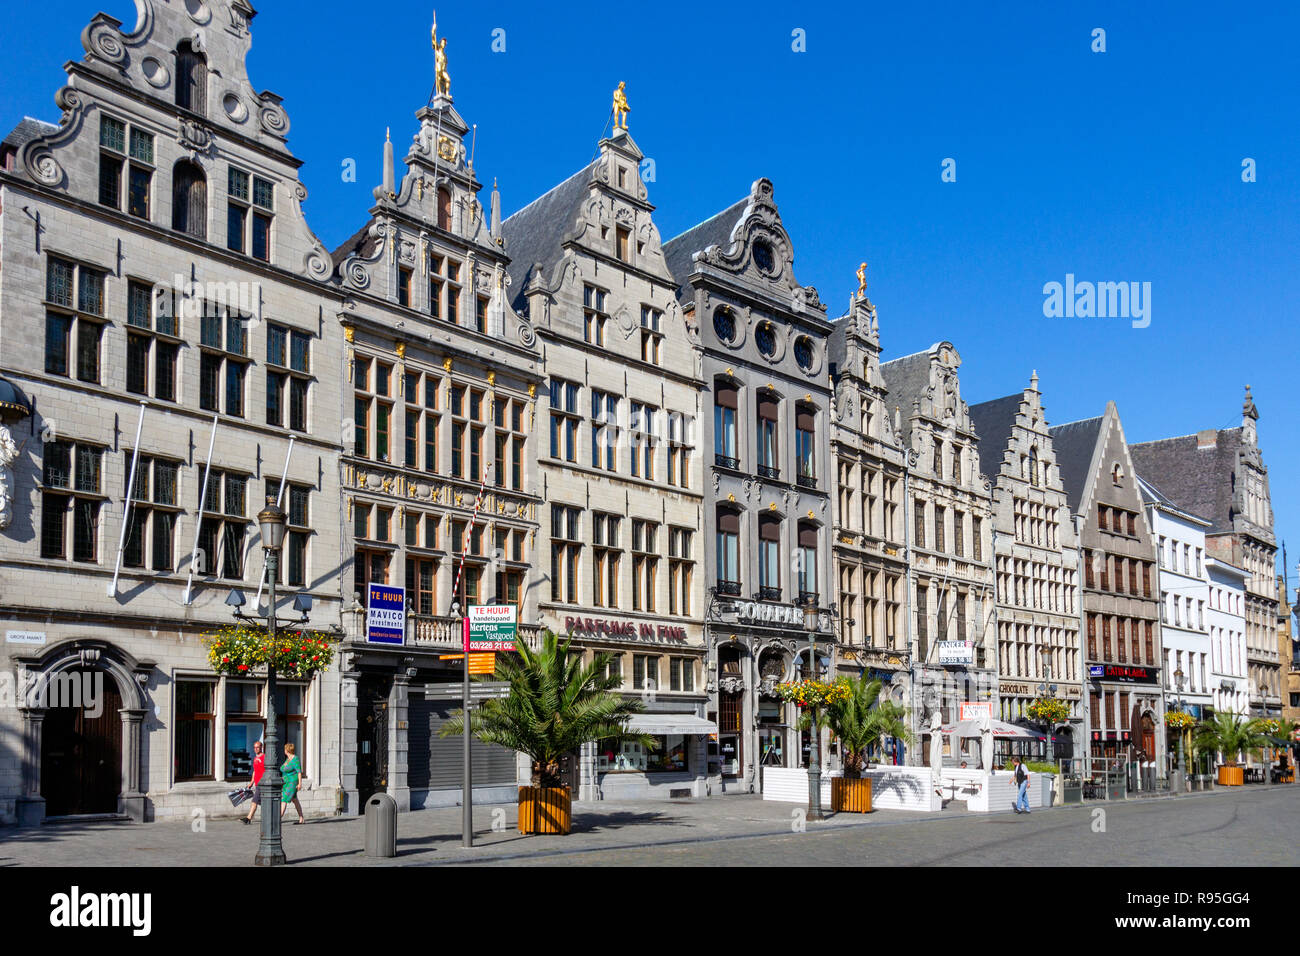 ANTWERP, BELGIUM - JUL 9, 2013: Row of houses and shops situated on the Grote Markt square in the historical centre of Antwerp. Stock Photo